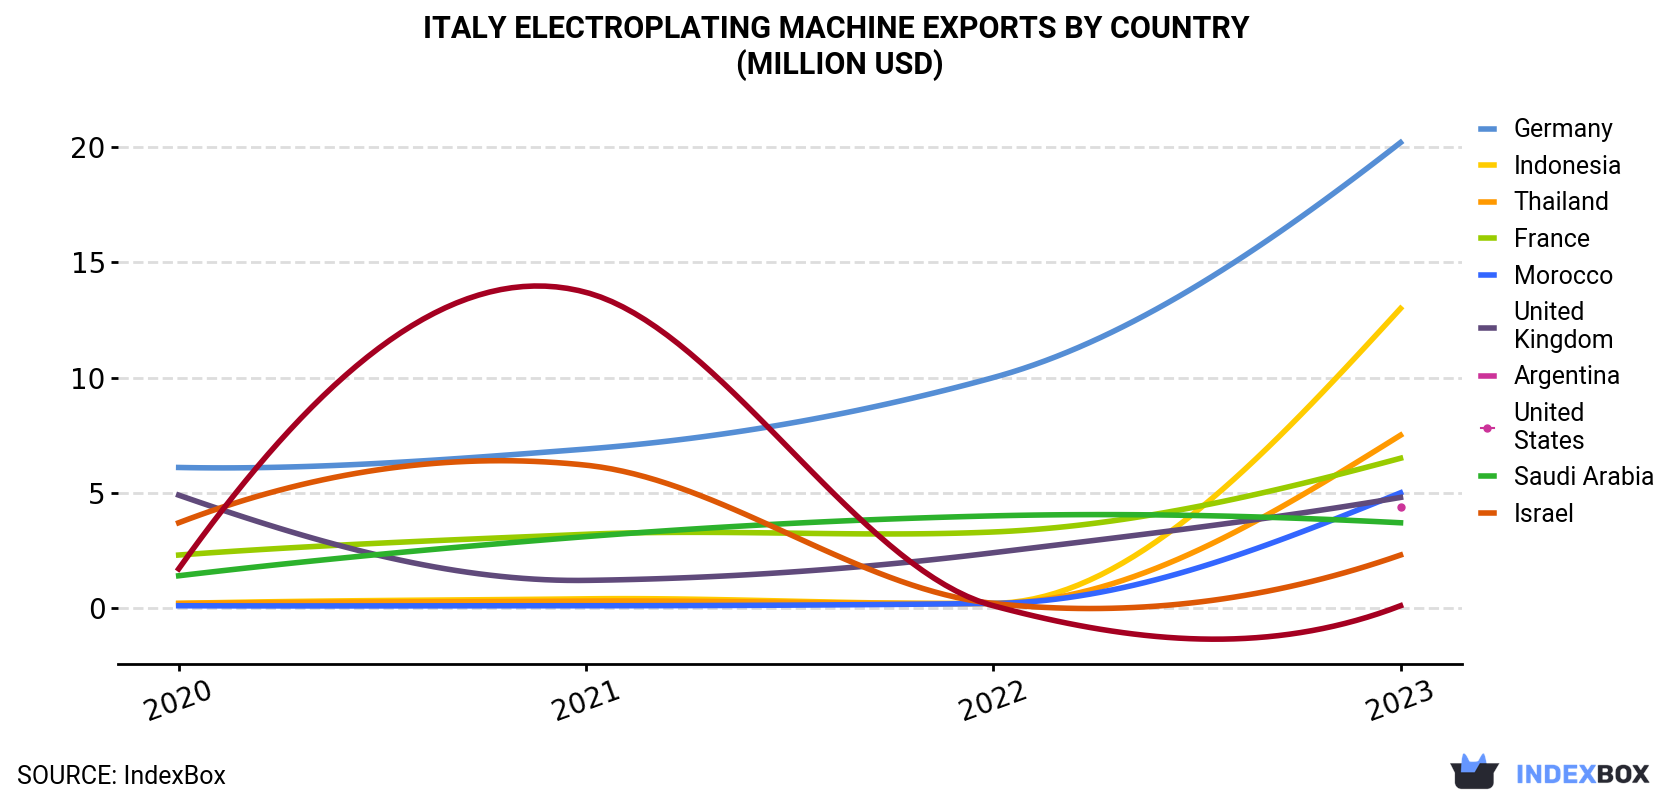 Italy Electroplating Machine Exports By Country (Million USD)